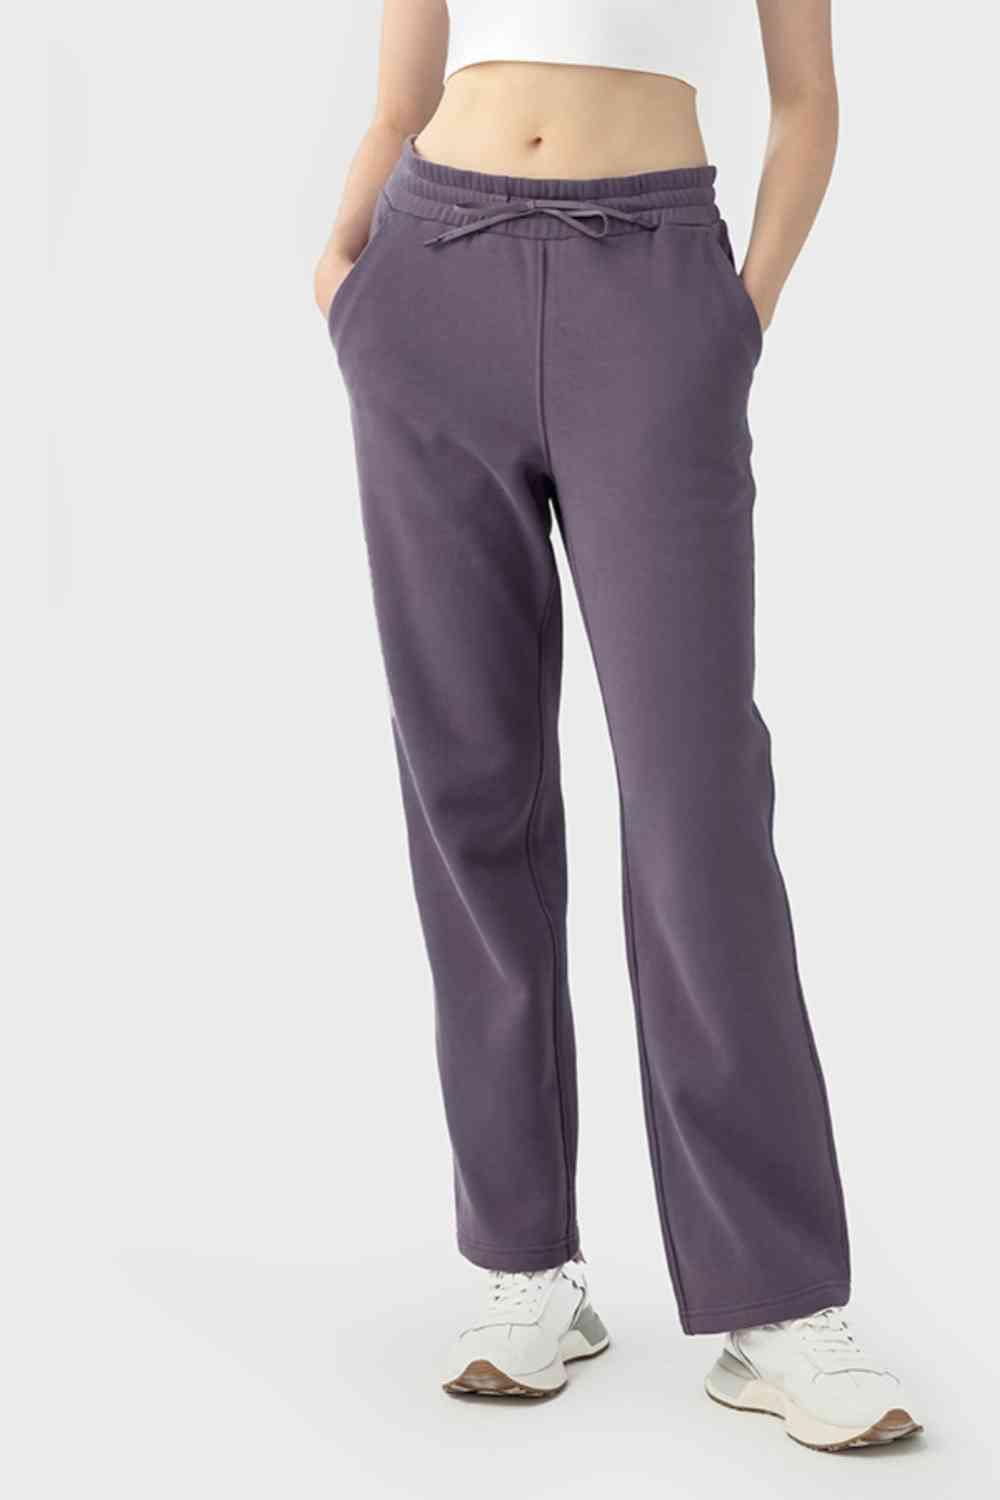 Drawstring Waist Sports Pants with Pockets - Immenzive